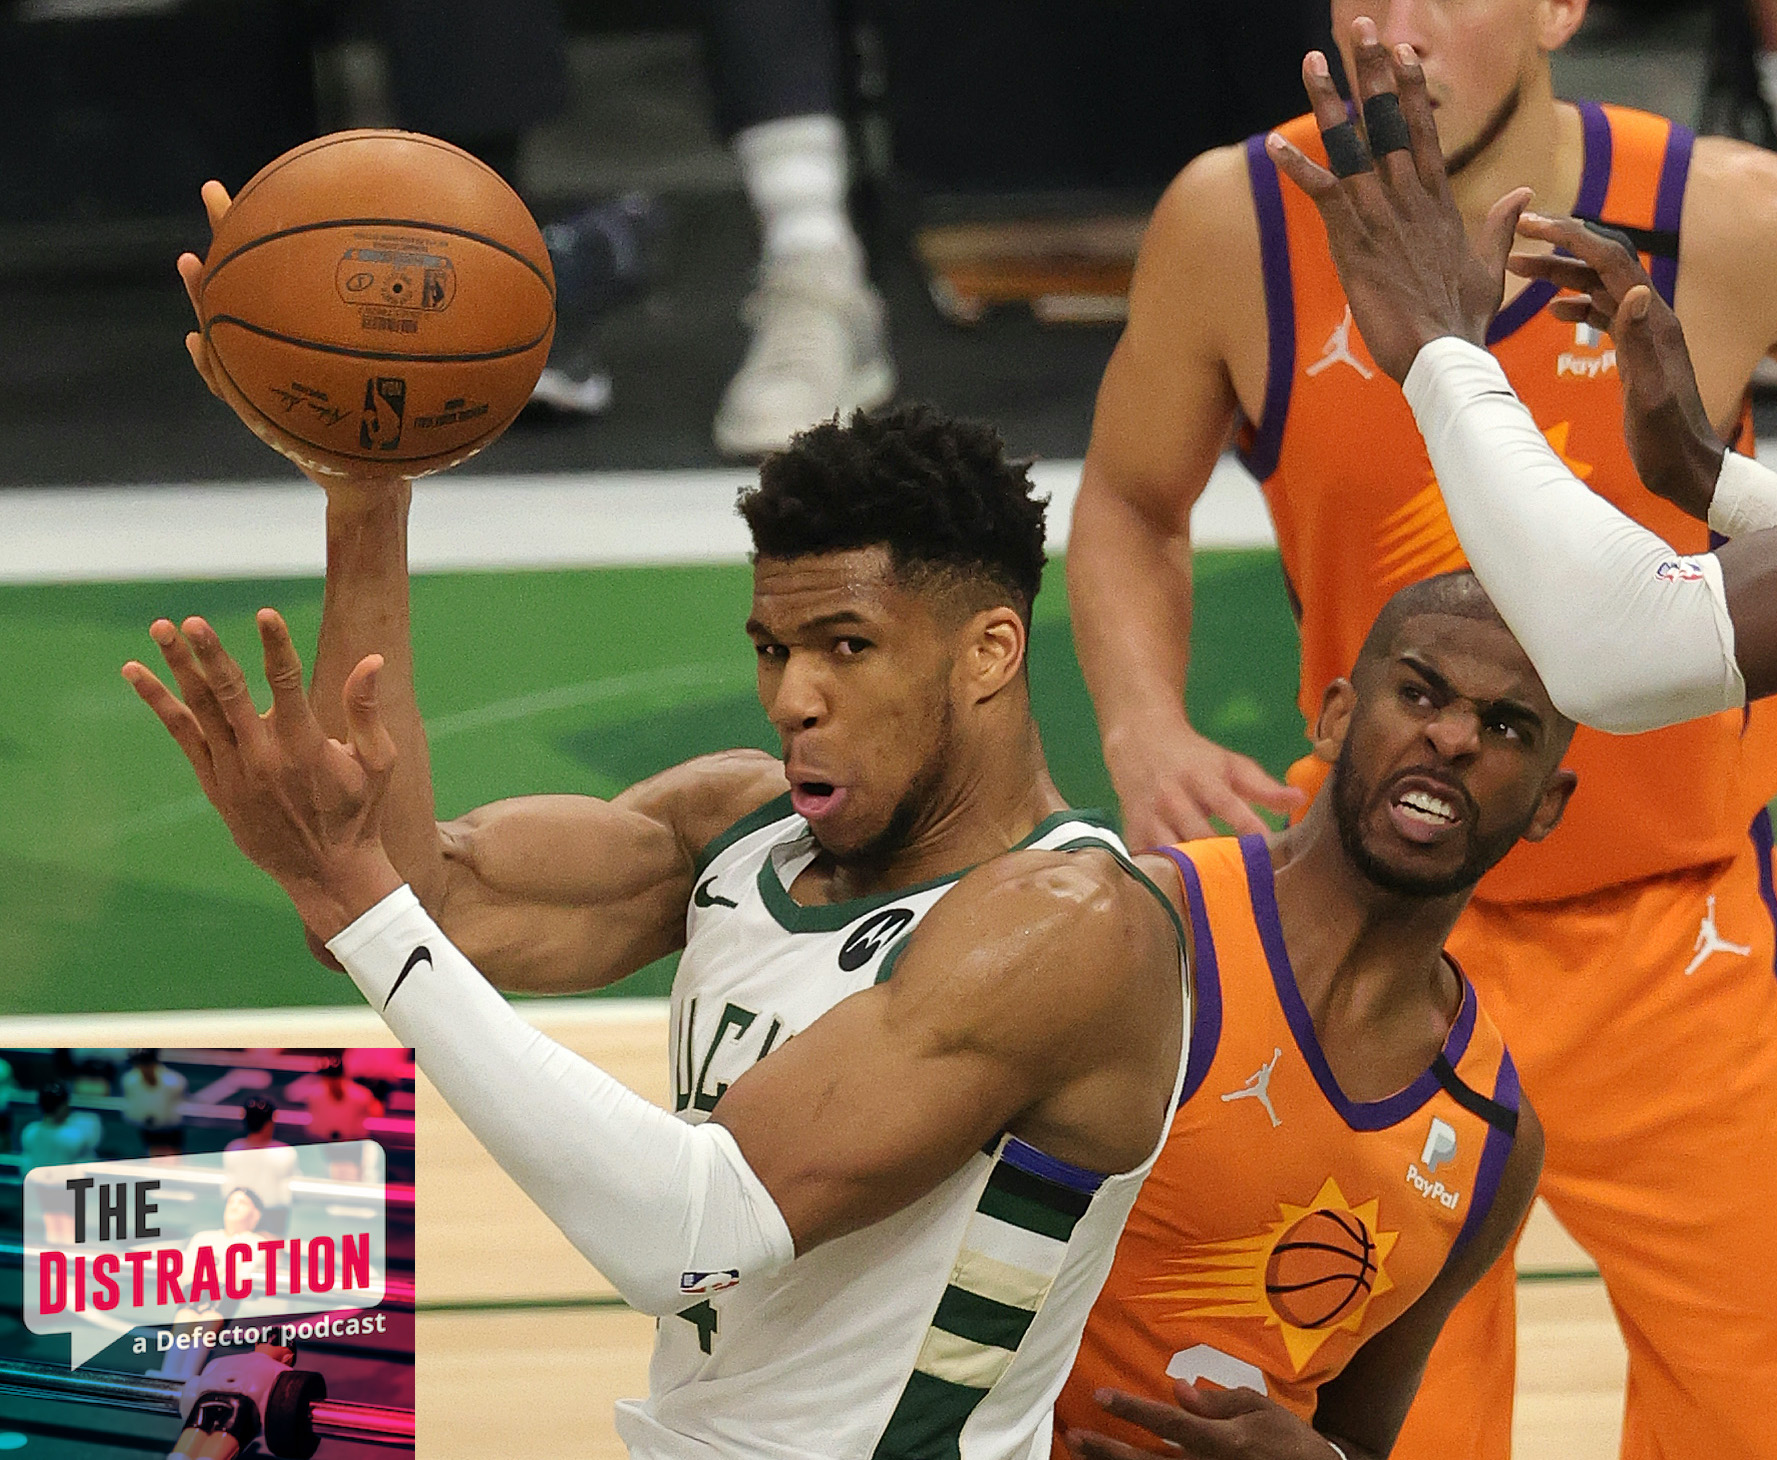 Giannis Antentokounmpo attempts a pass while being fouled by Chris Paul in Game 4 of the NBA Finals